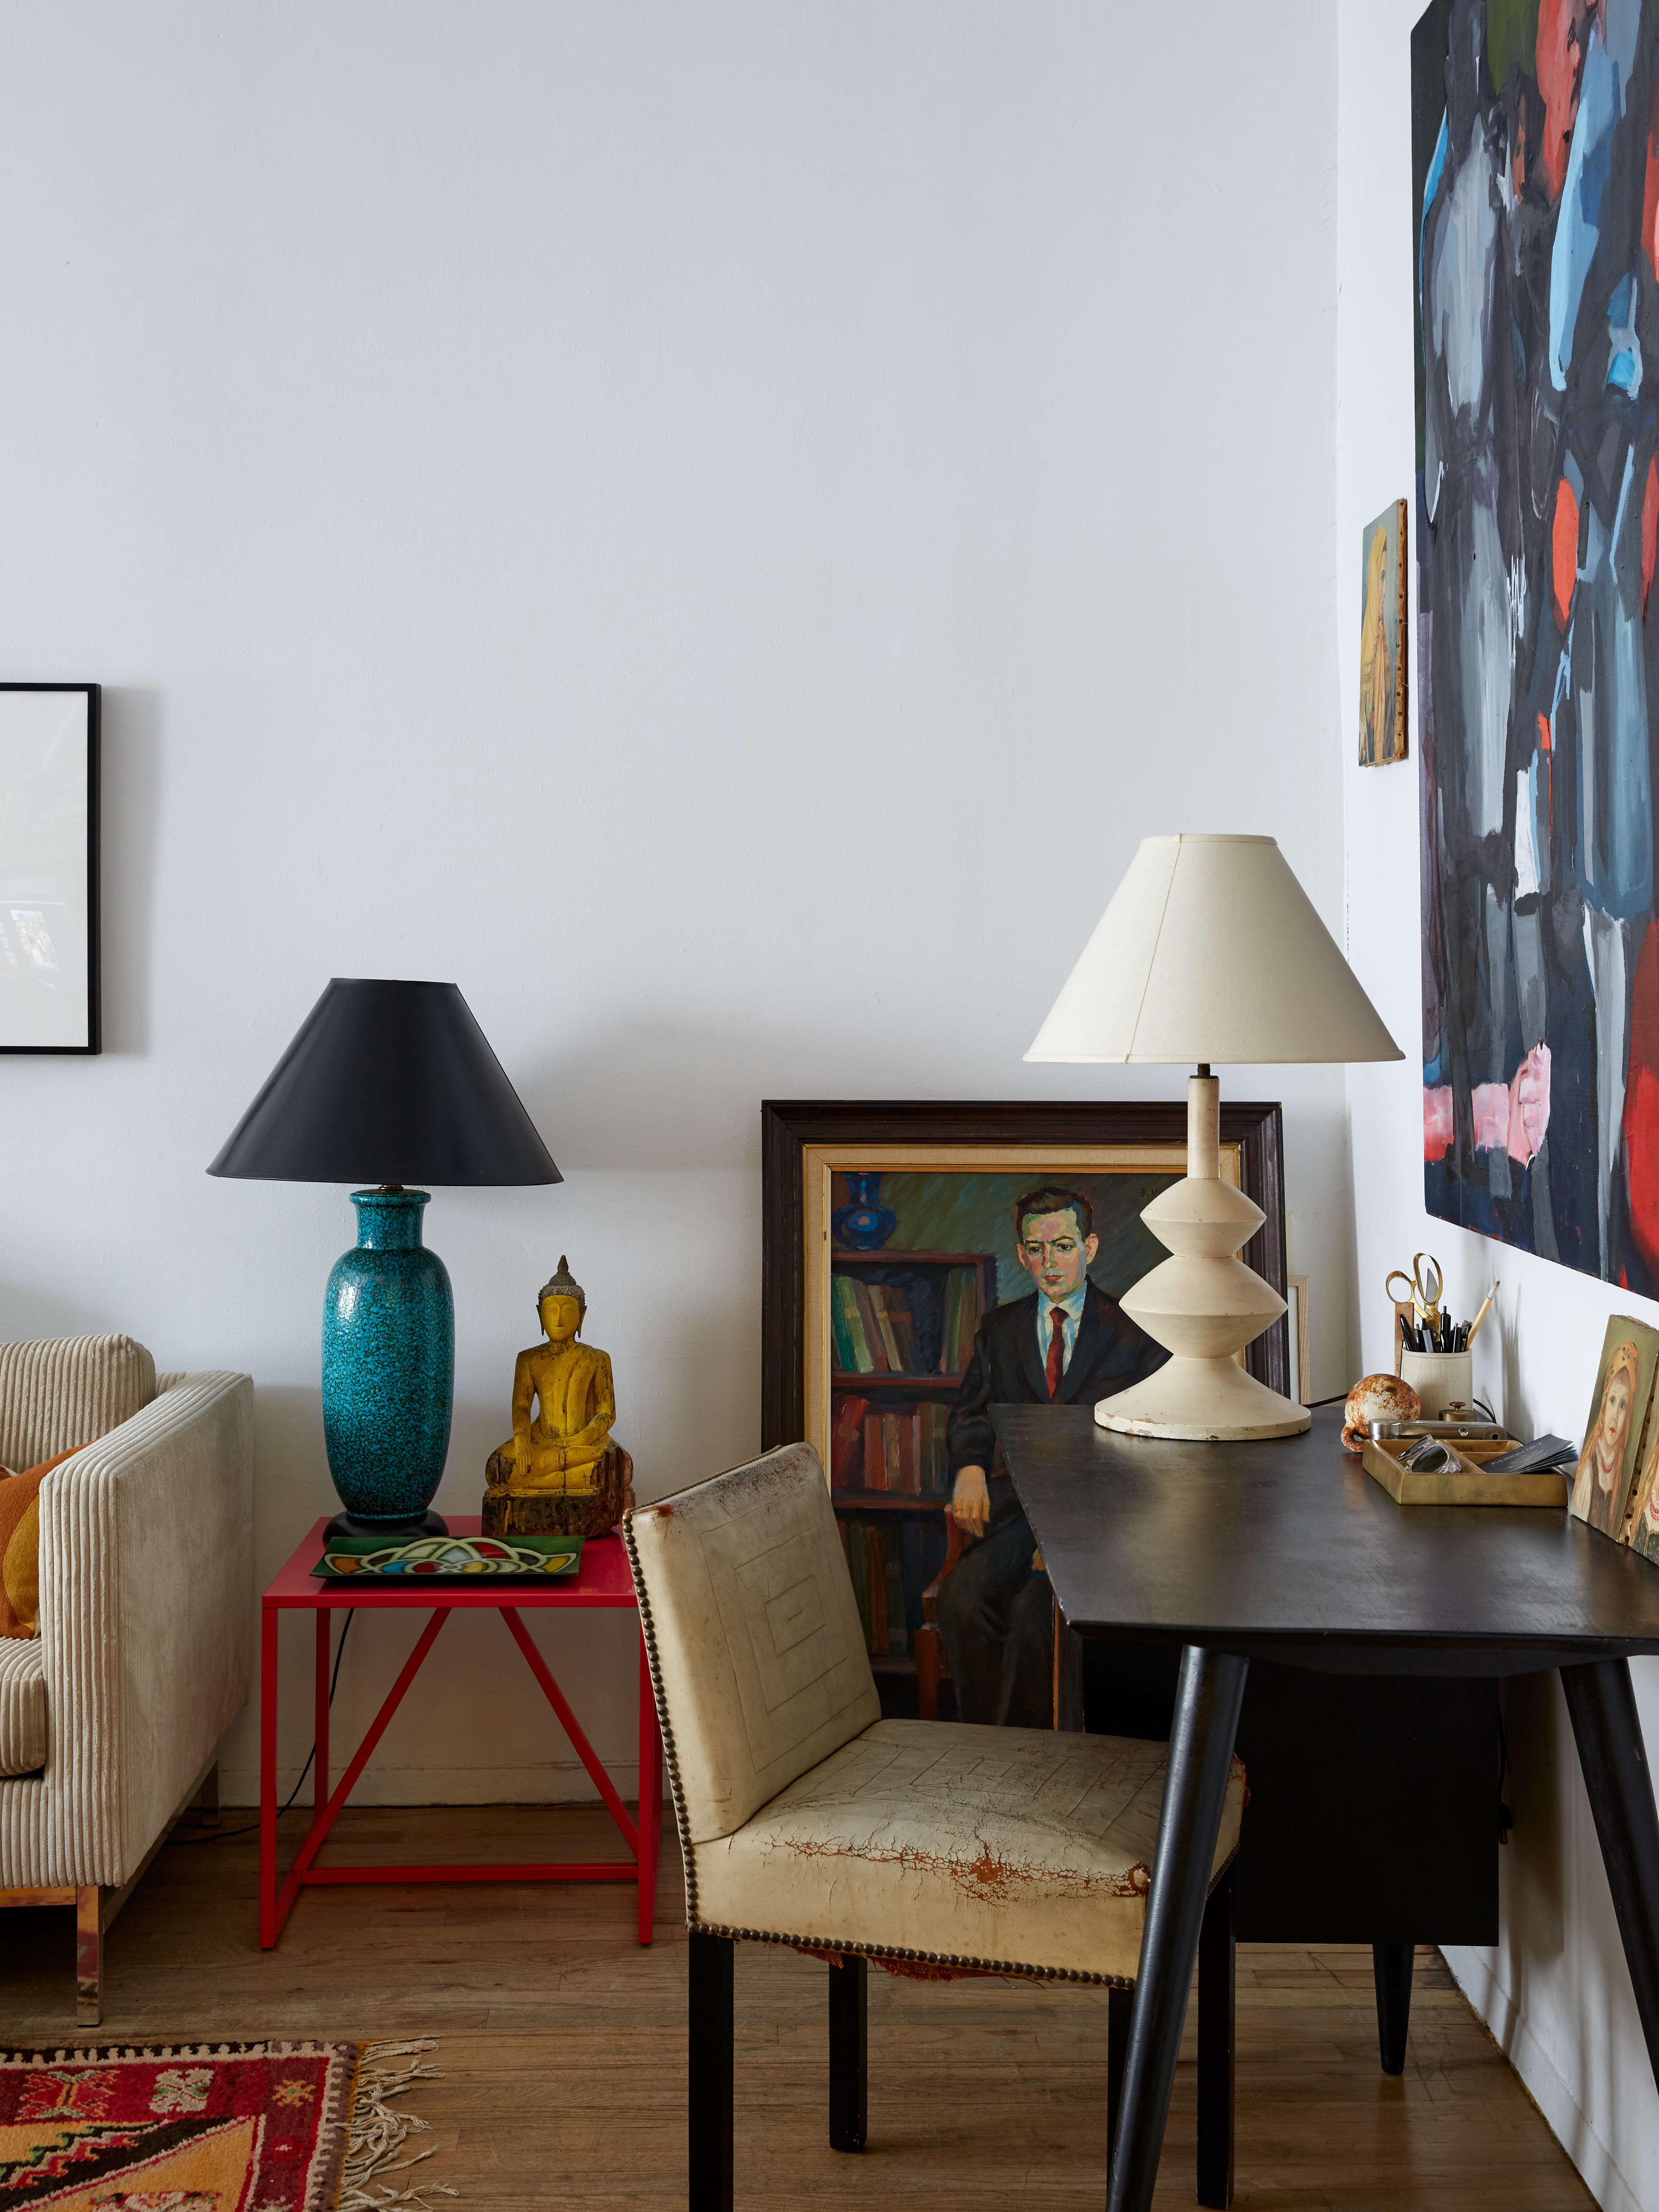 Living with art and sculptural lamps in a small rental apartment